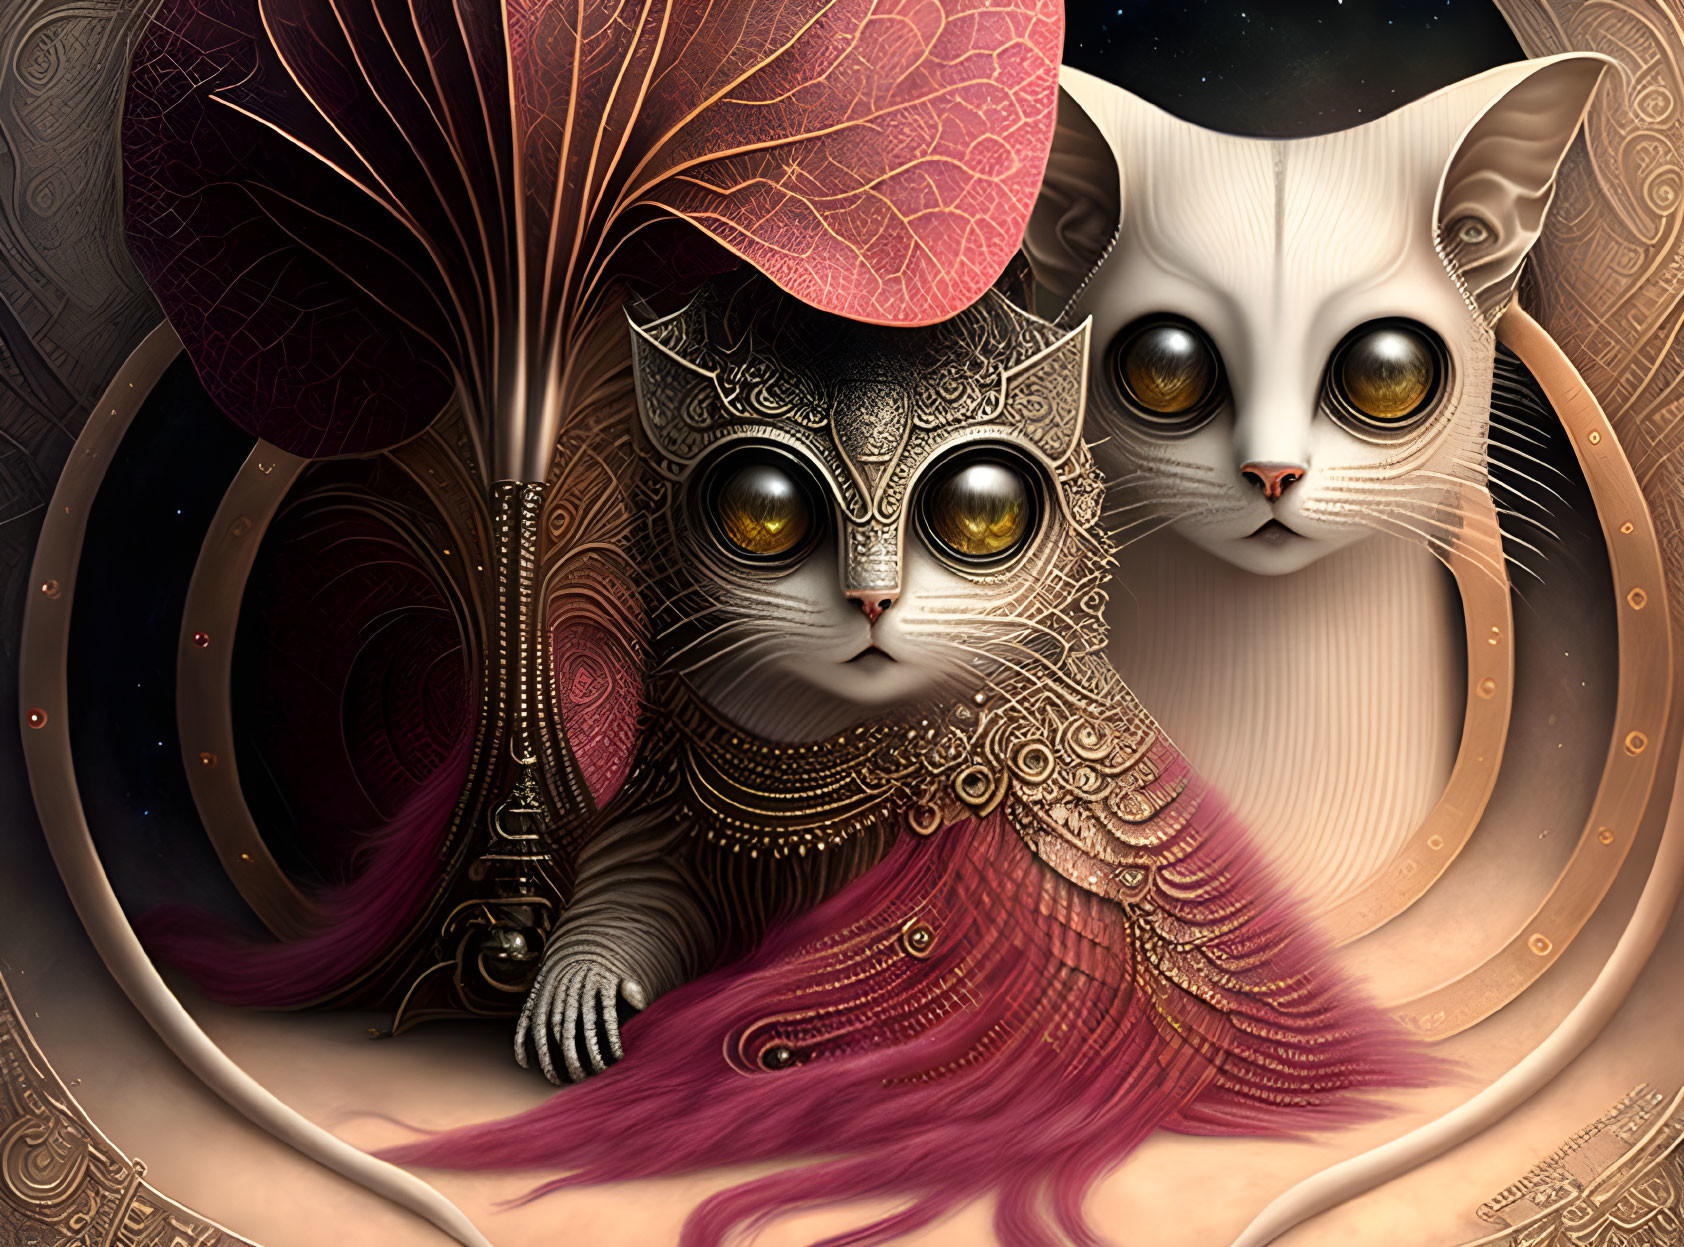 Surreal illustration of stylized cats with expressive eyes and leaf-like embellishments on taupe backdrop